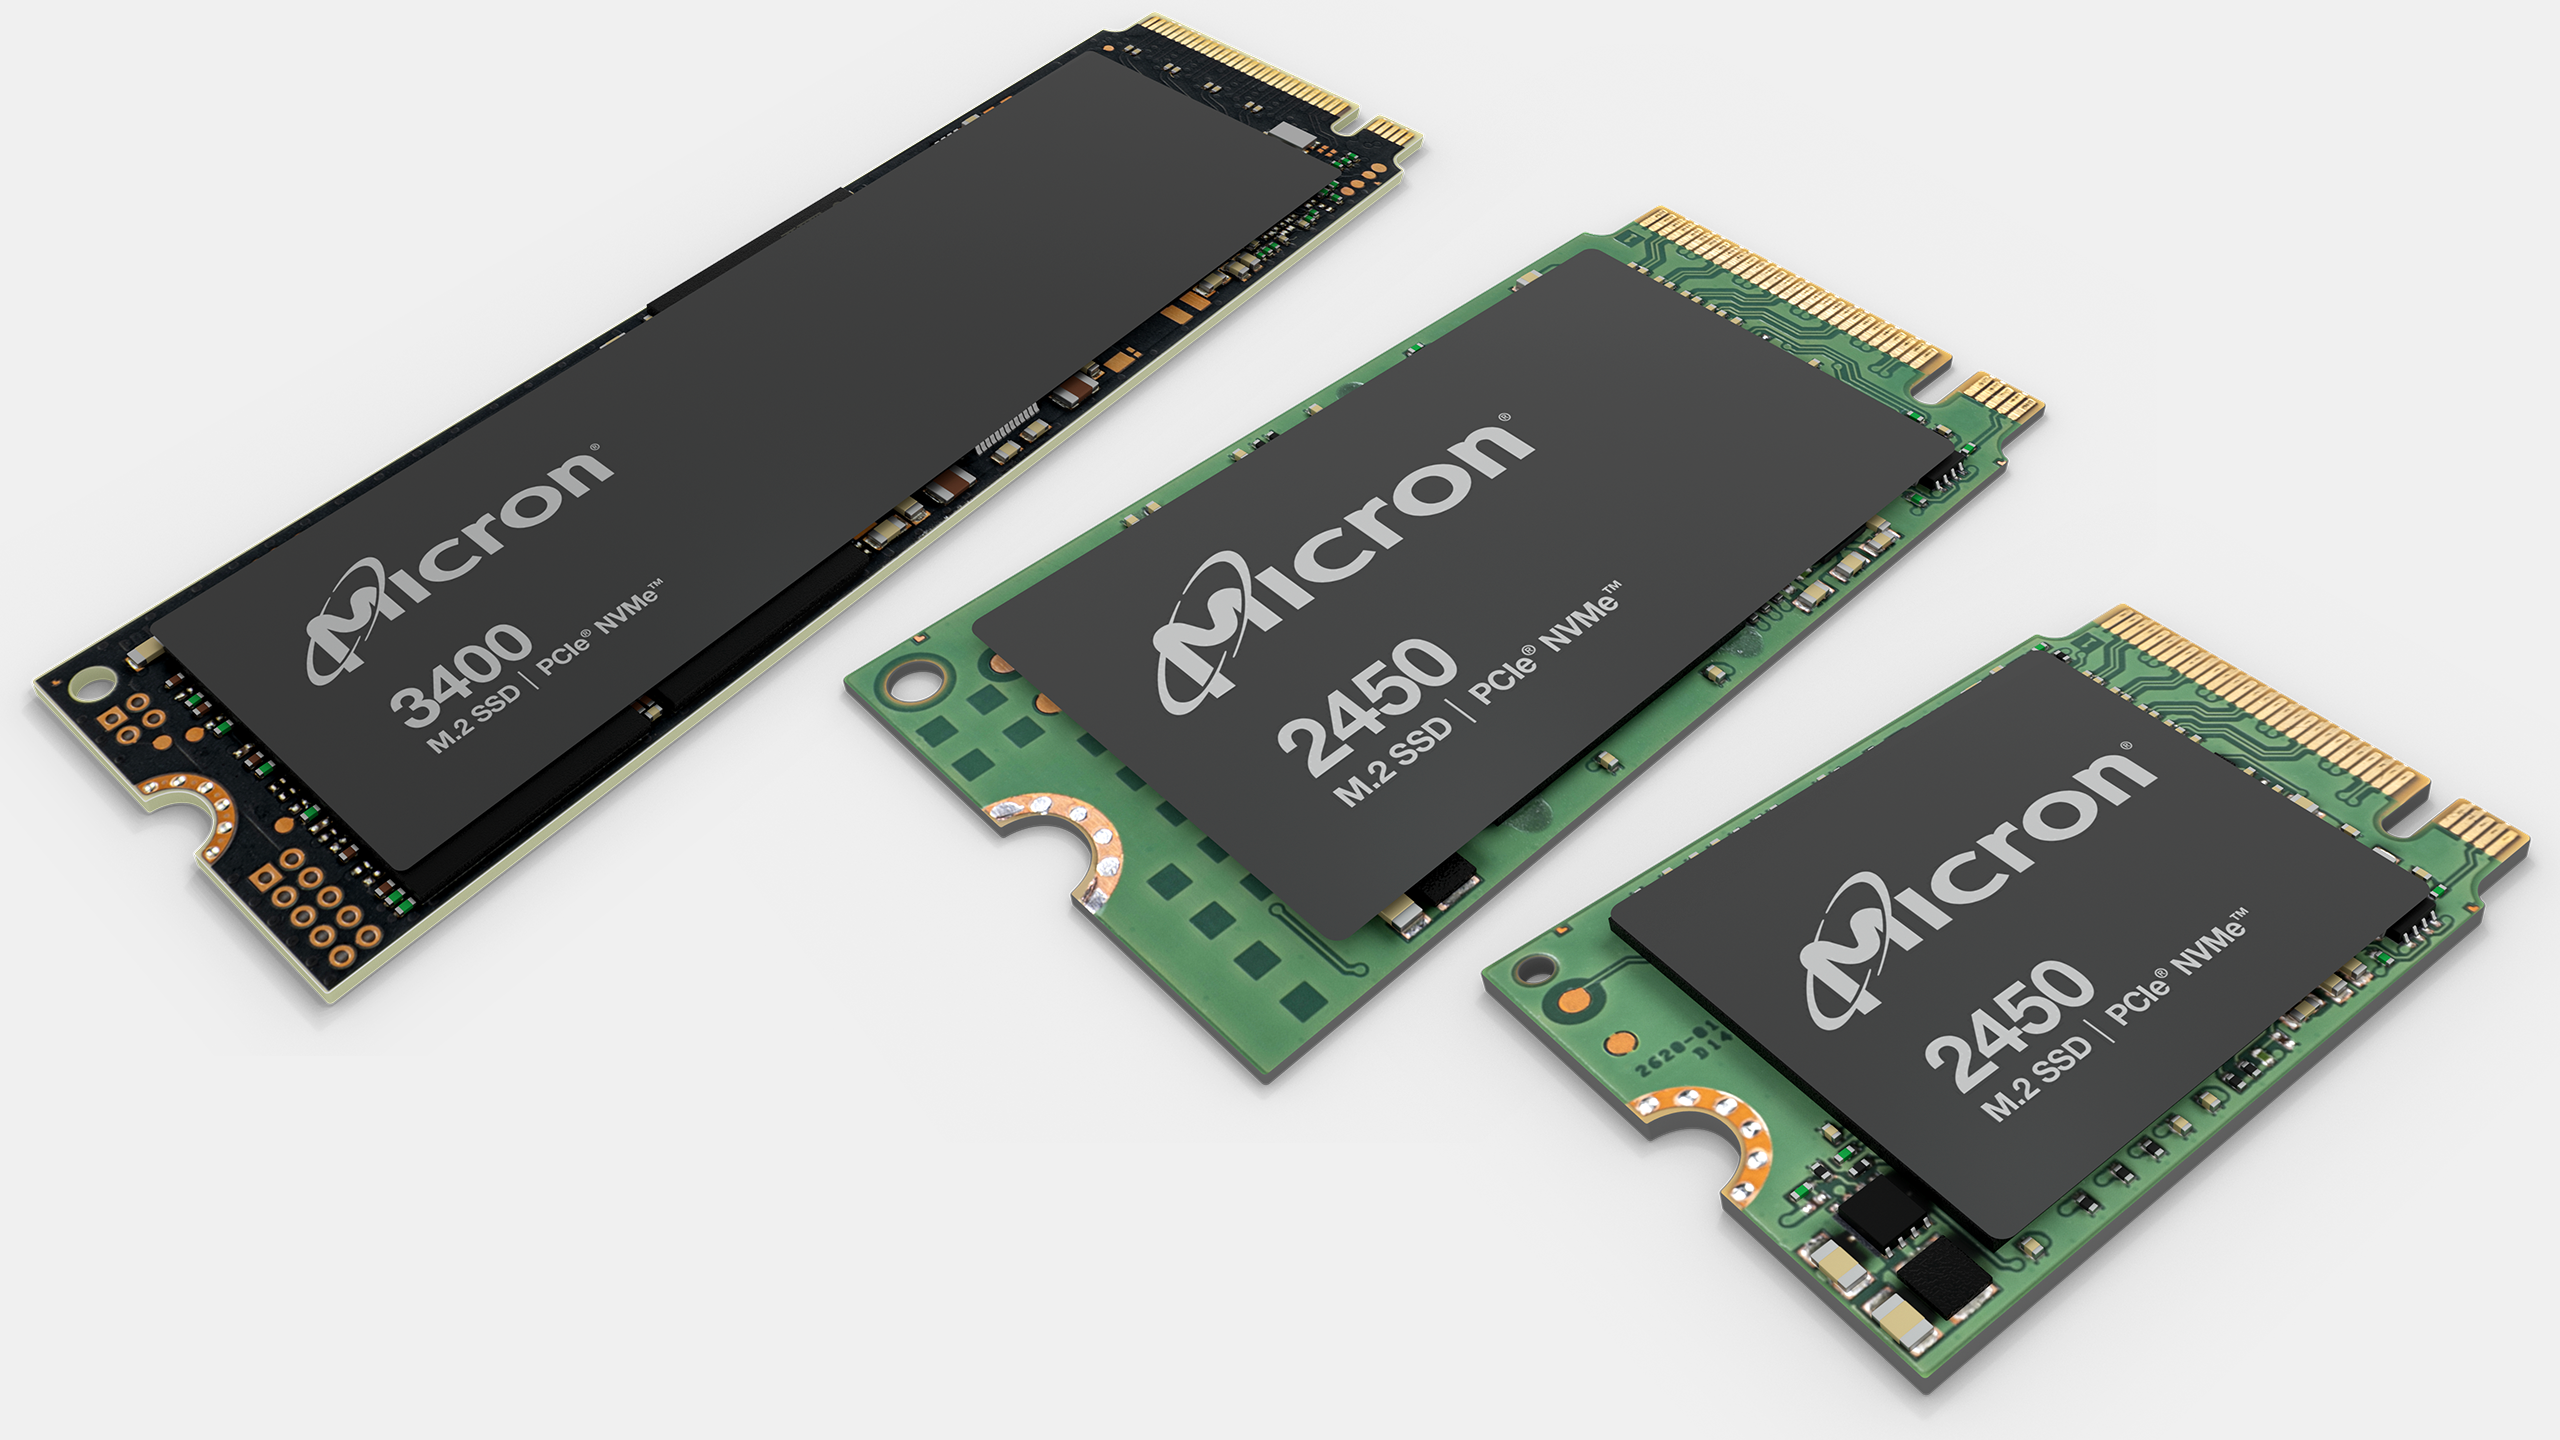 micron-unveils-pcie-4.0-2450-and-3400-series-ssds-with-176-layer-3d-nand